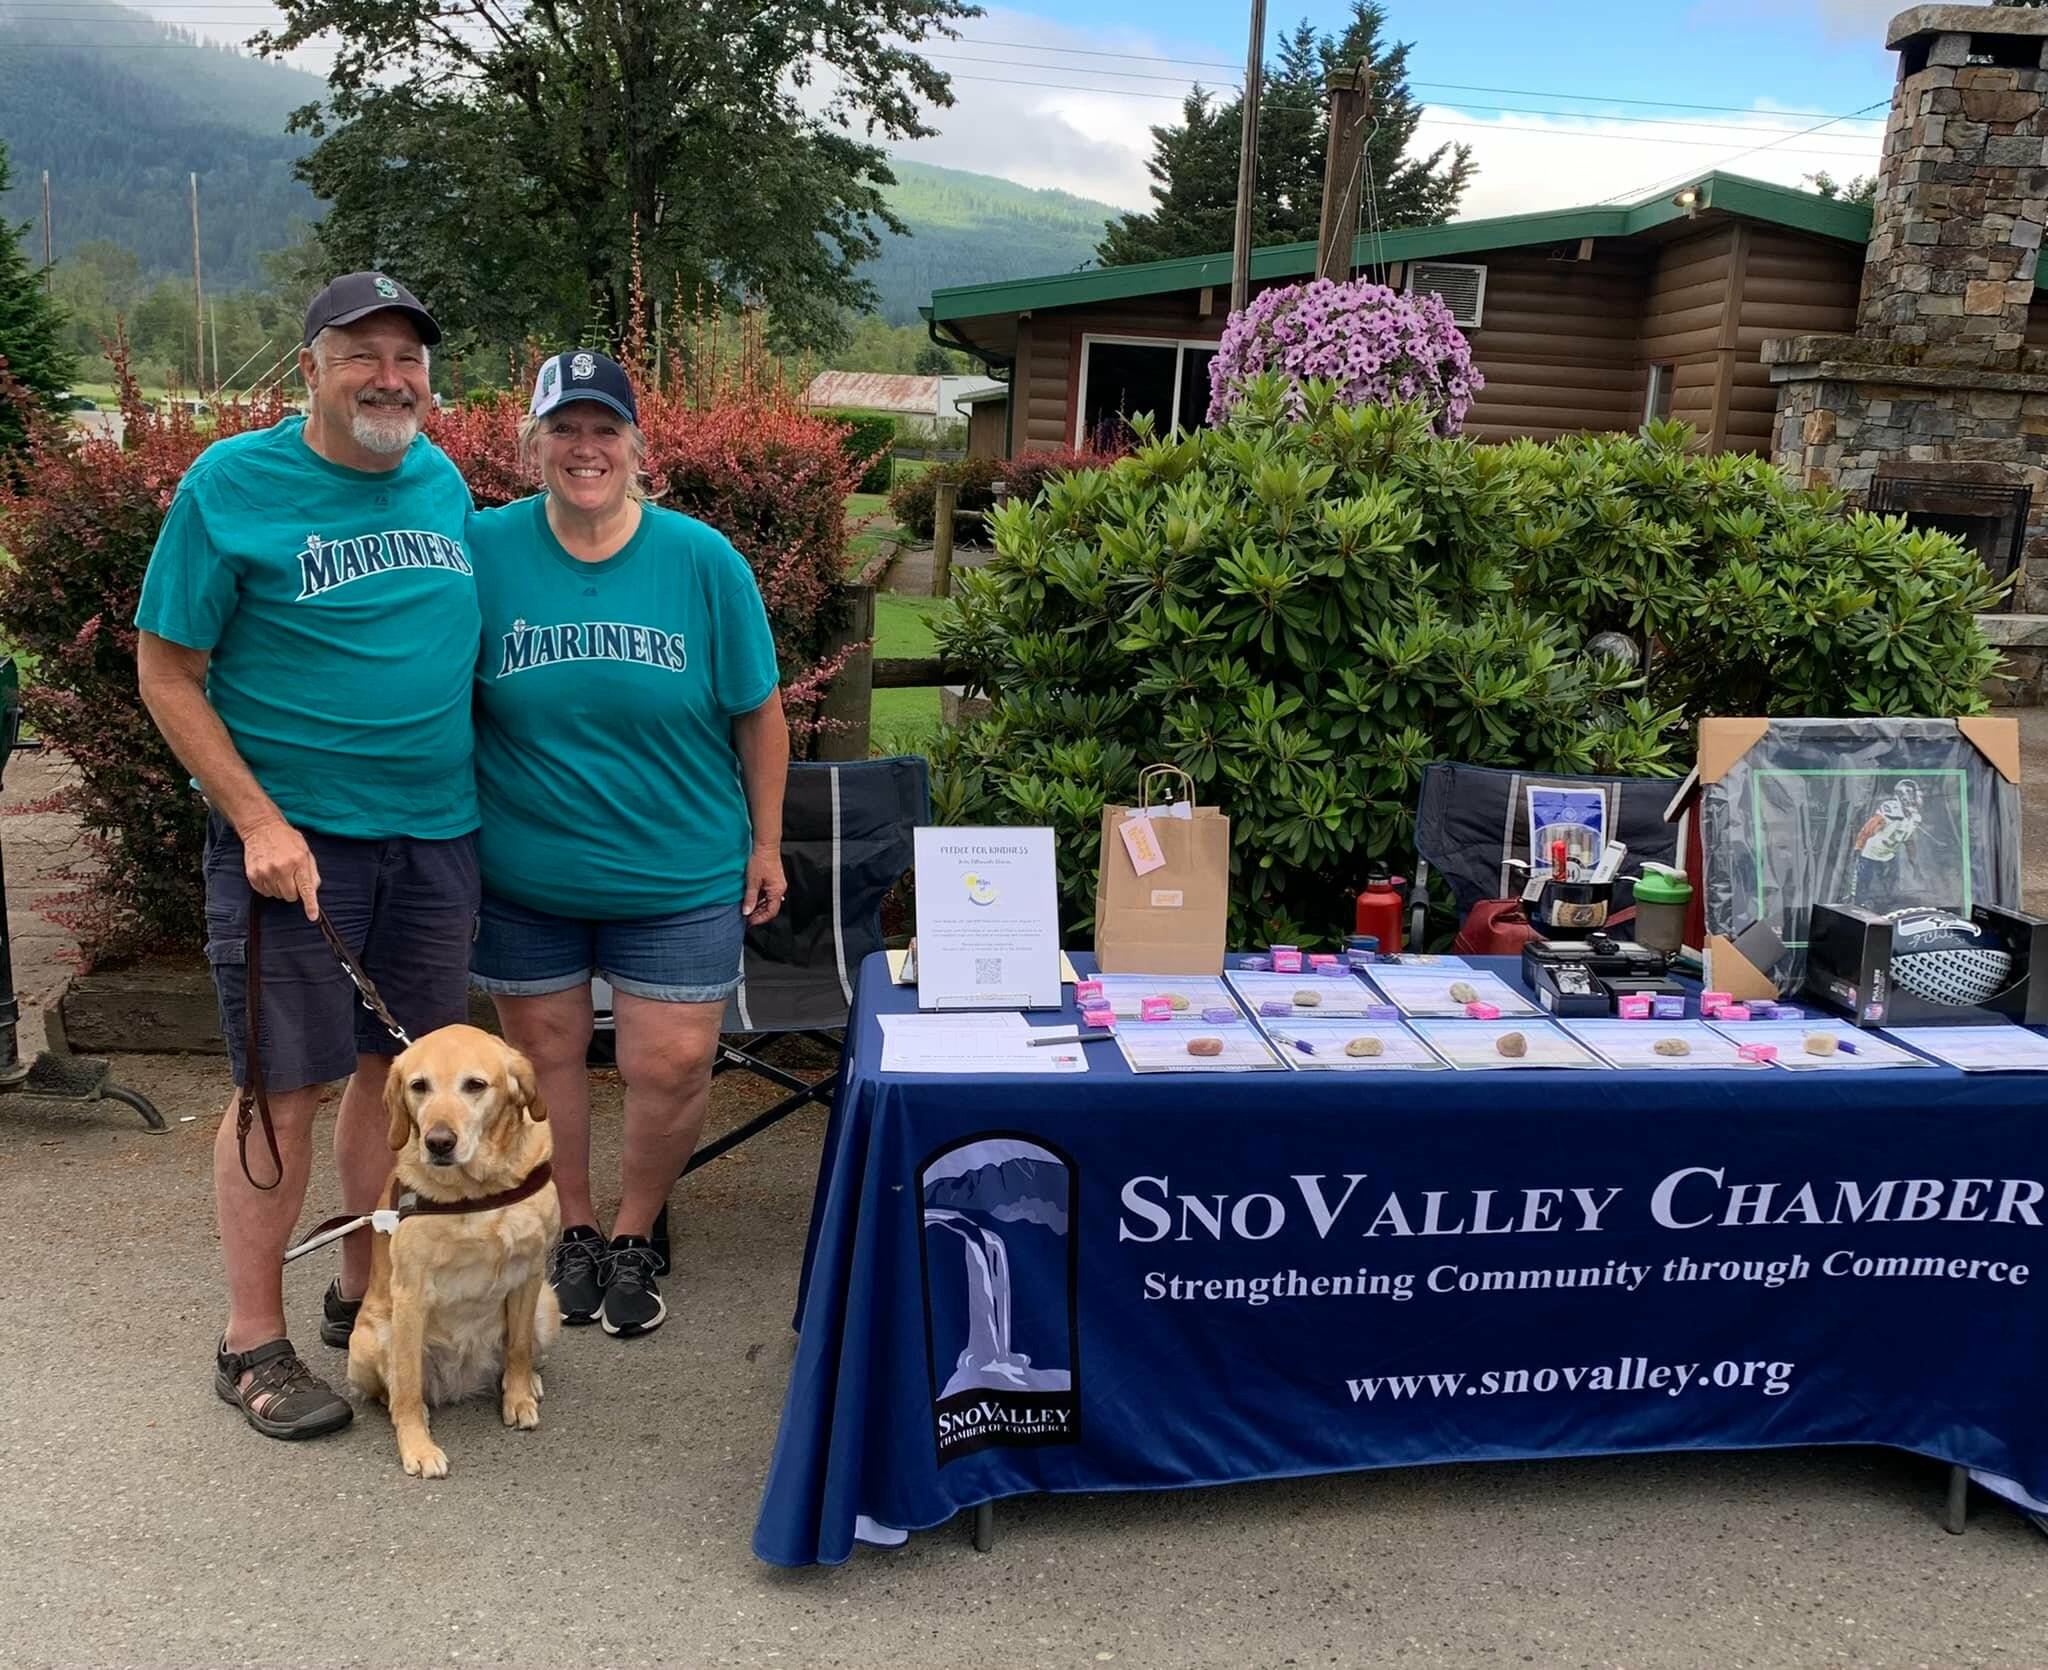 Clark and Karrie Roberts of Ultimate Vision. Photo courtesy of the SnoValley Chamber of Commerce.